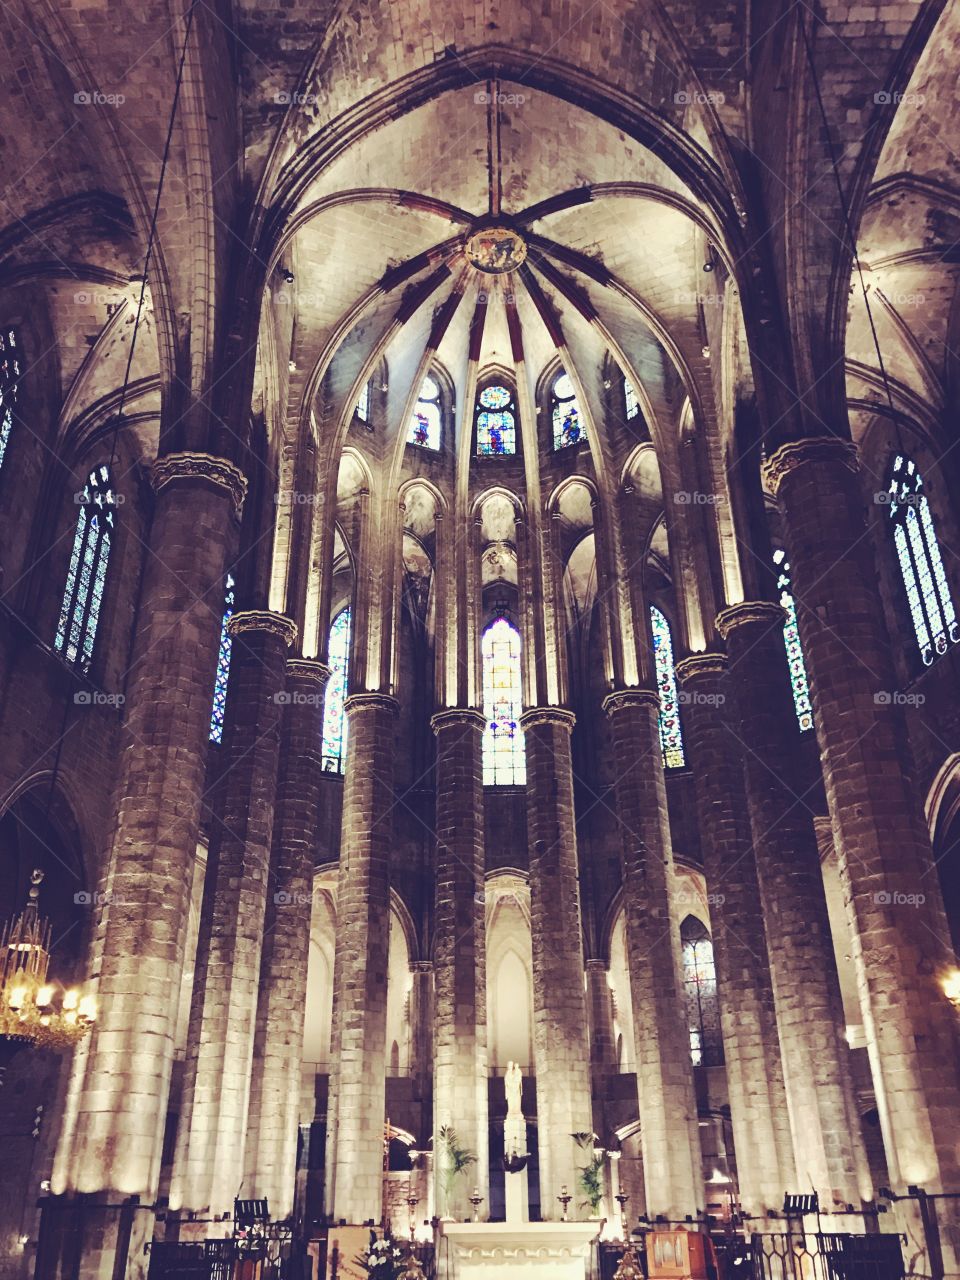 Santa Maria del Mar is an imposing church in the Ribera district of Barcelona, Spain, built between 1329 and 1383 at the height of Catalonia's maritime and mercantile preeminence.